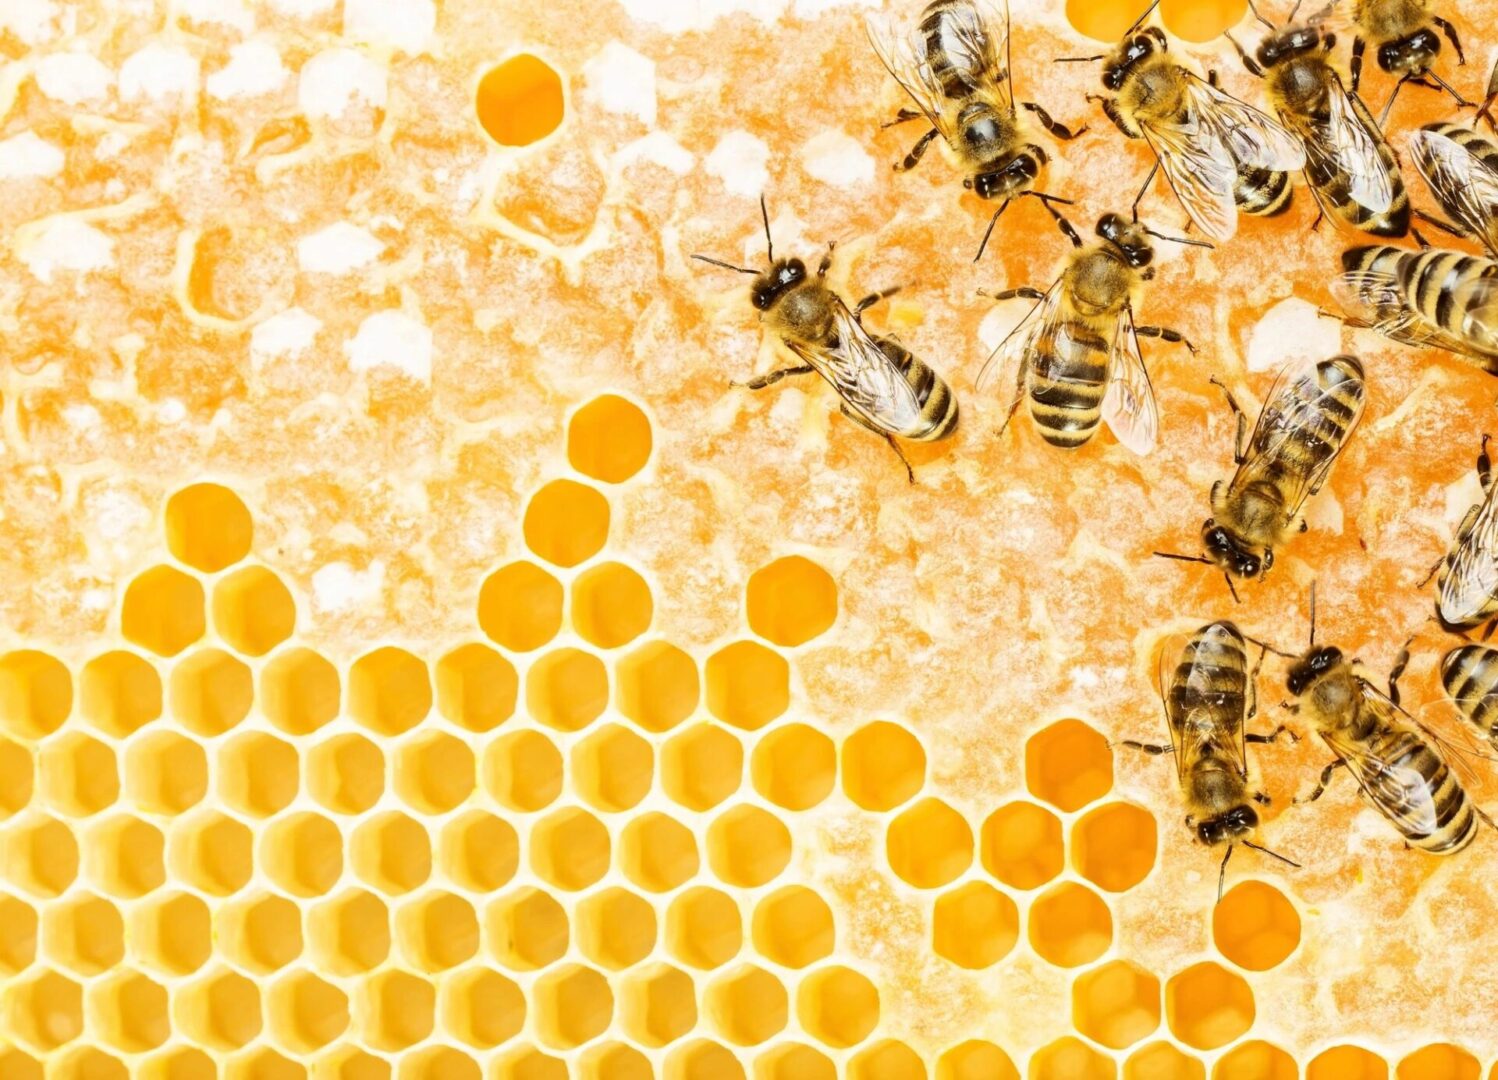 A close up of bees on honeycomb